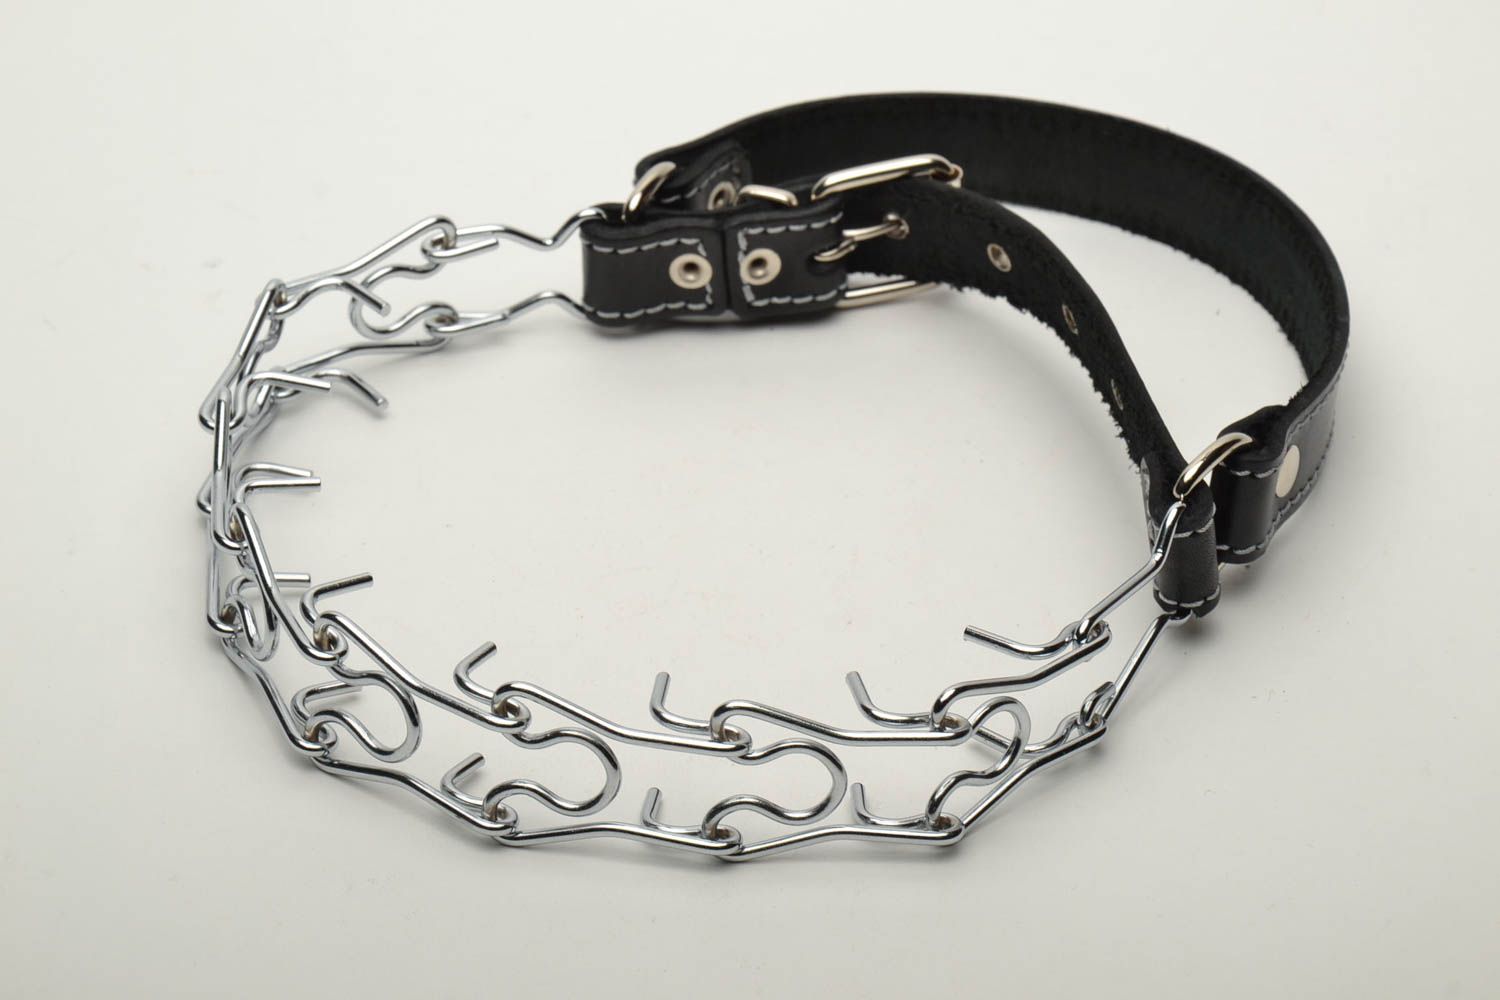 Strict metal collar with leather straps photo 2